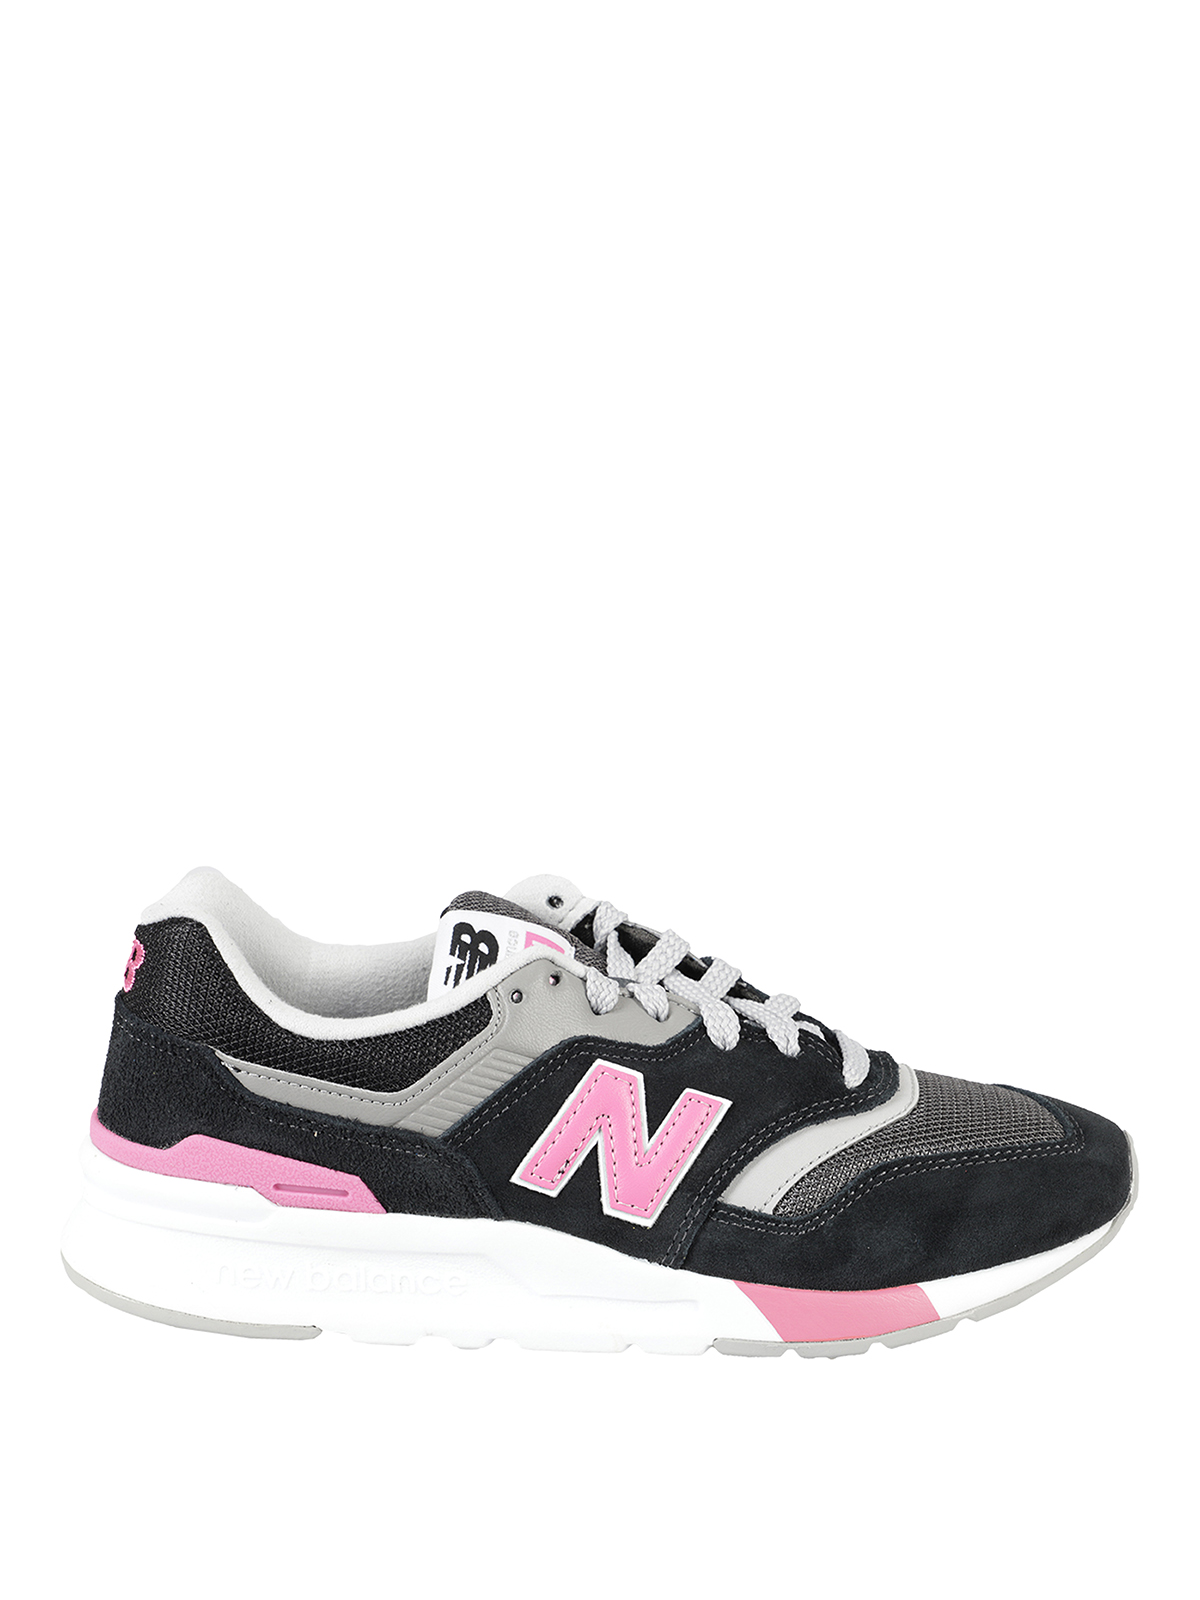 NEW BALANCE 997H SNEAKERS